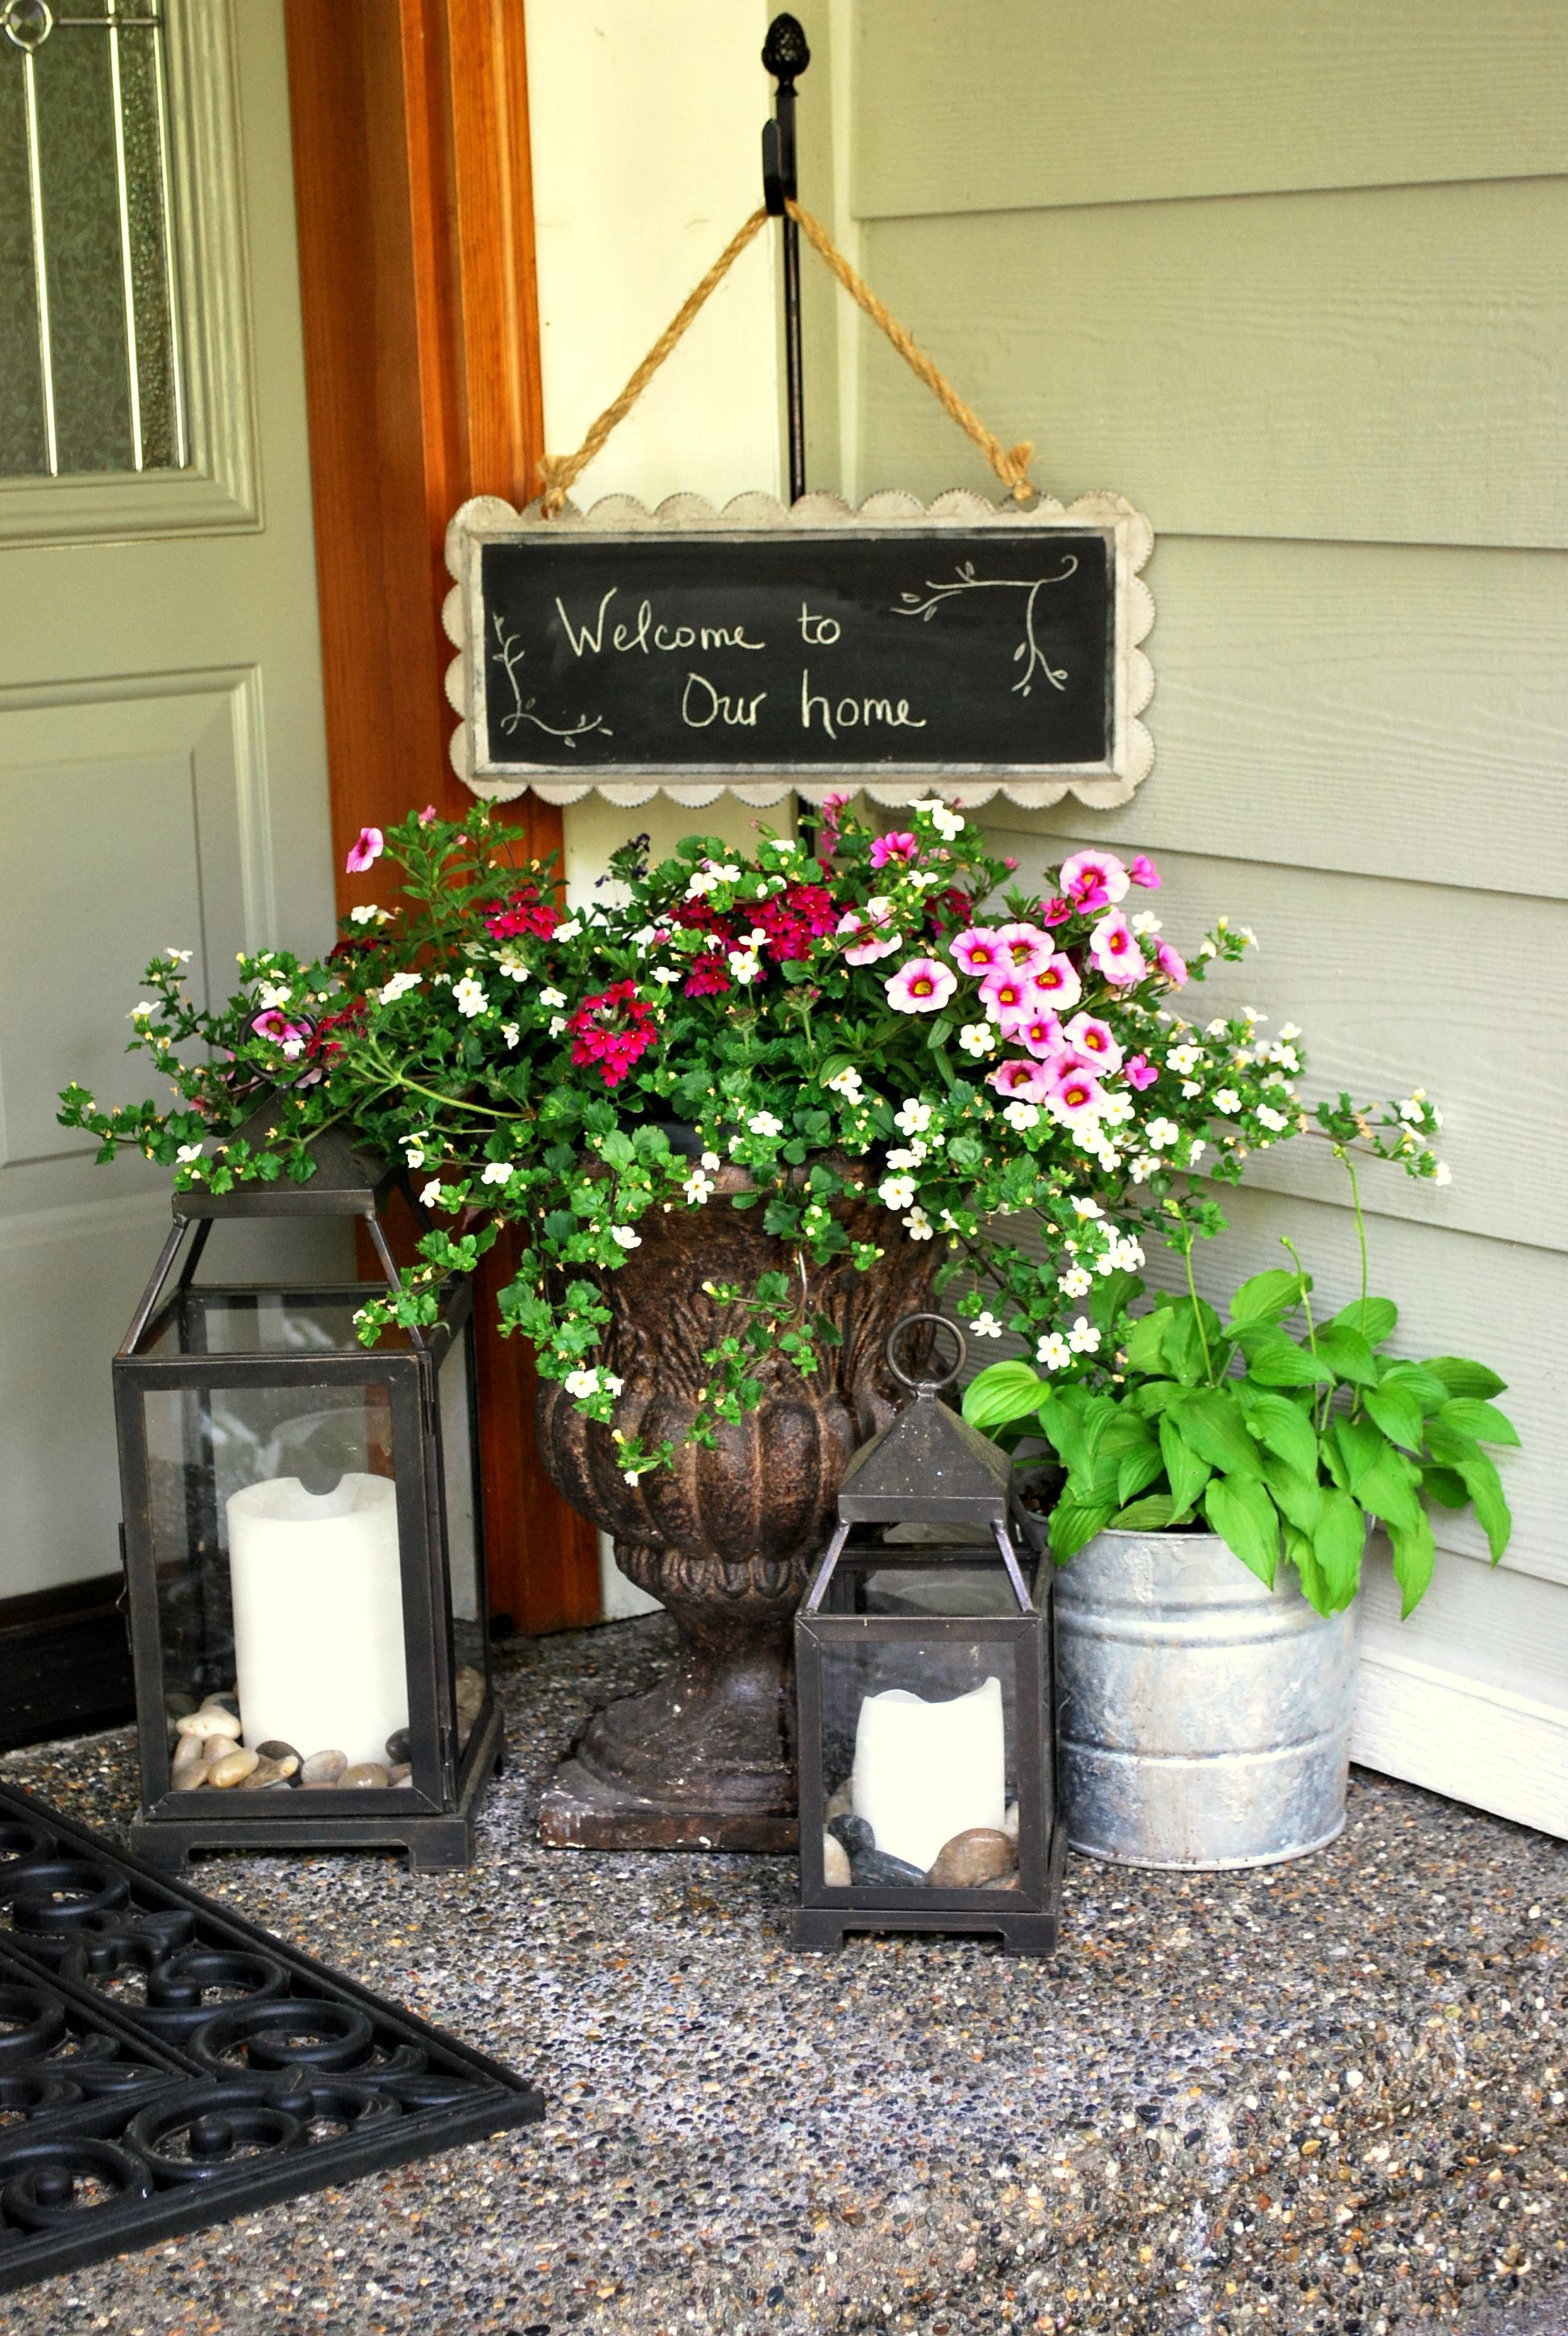 A very welcoming entrance!